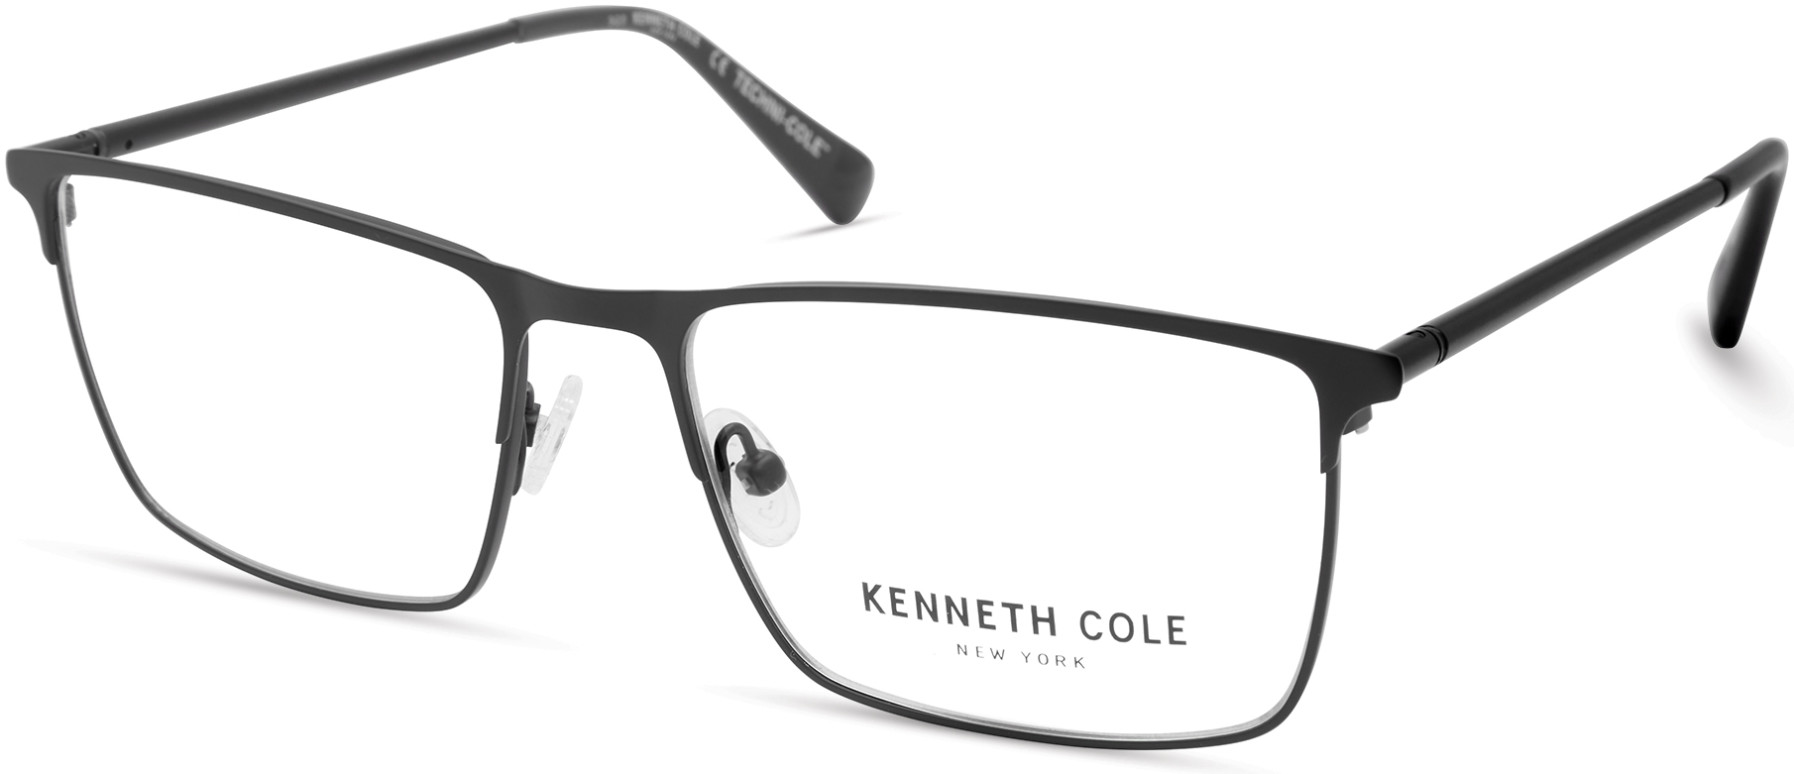 KENNETH COLE NY 0323